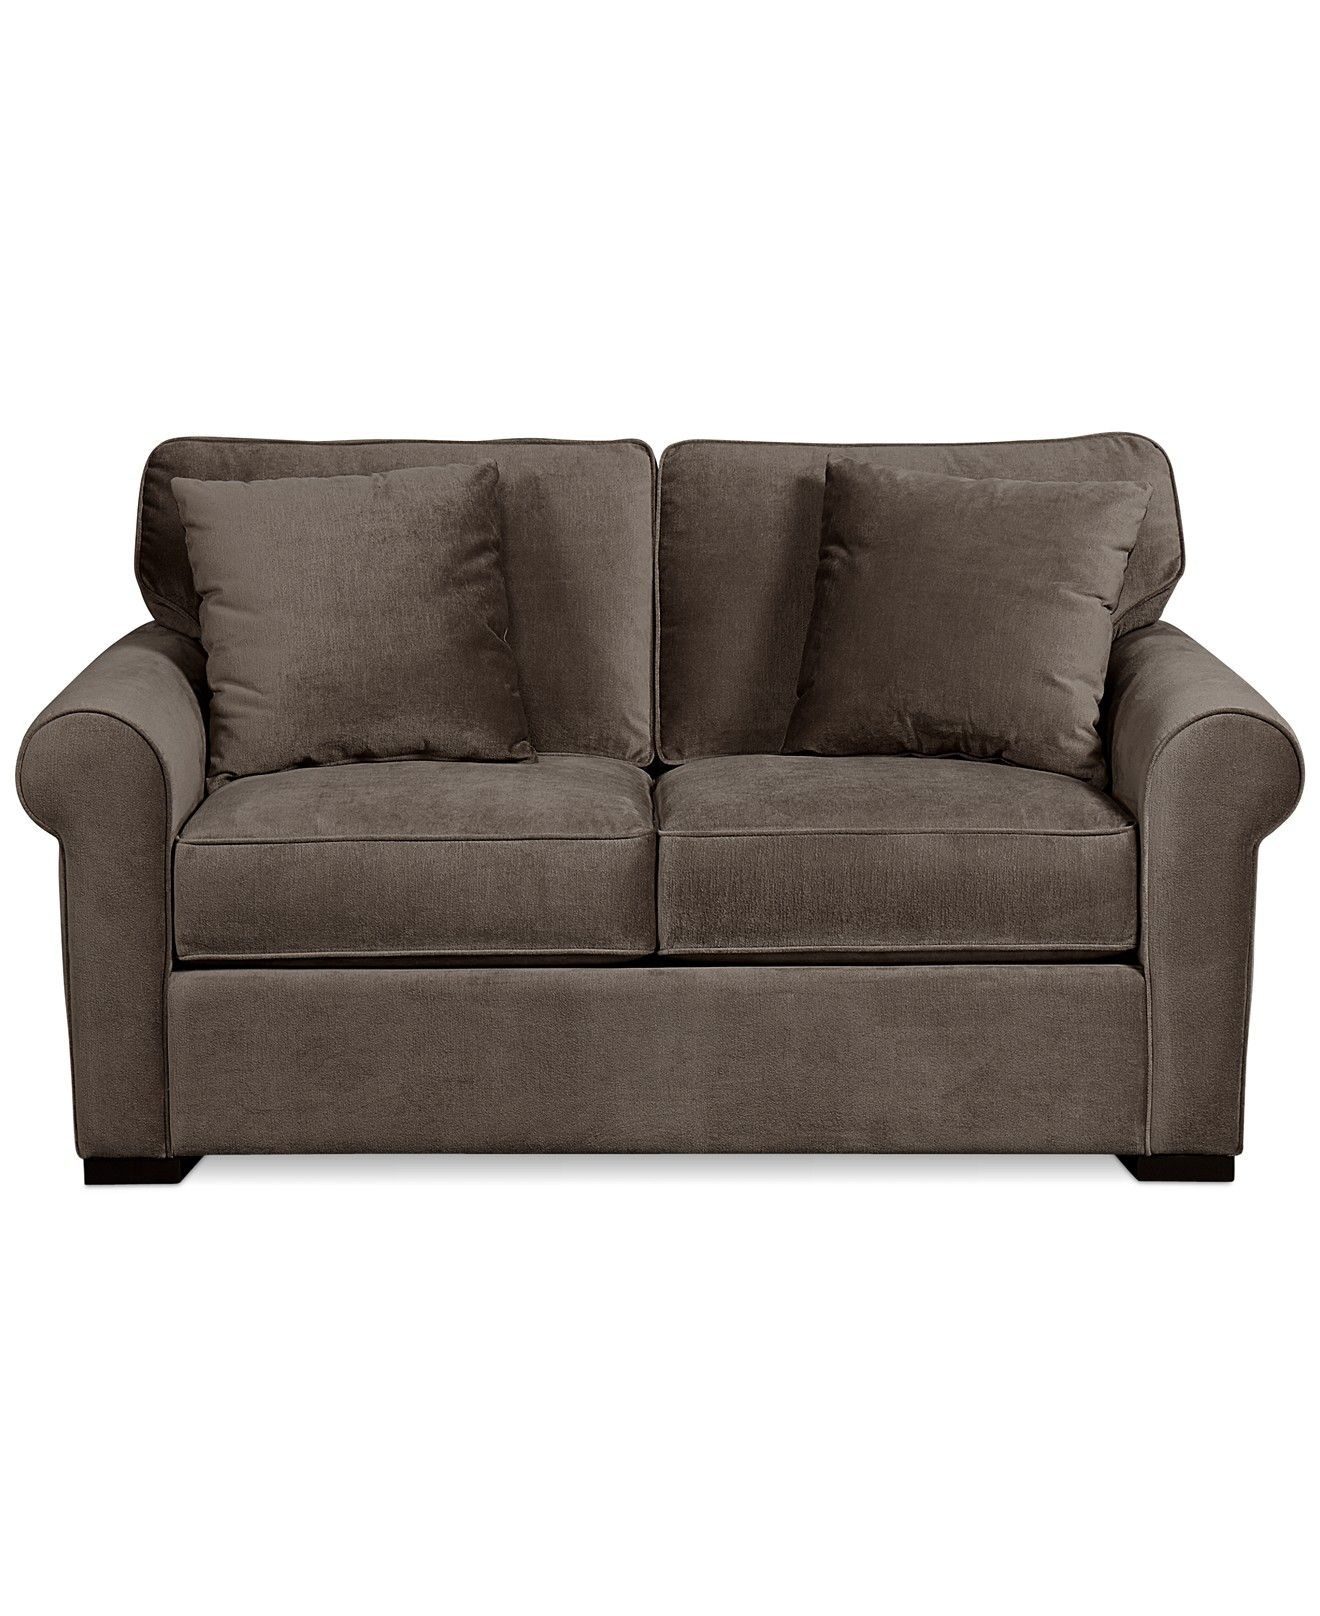 Remo Ii Fabric Loveseat Couches Sofas Furniture with regard to measurements 1320 X 1616